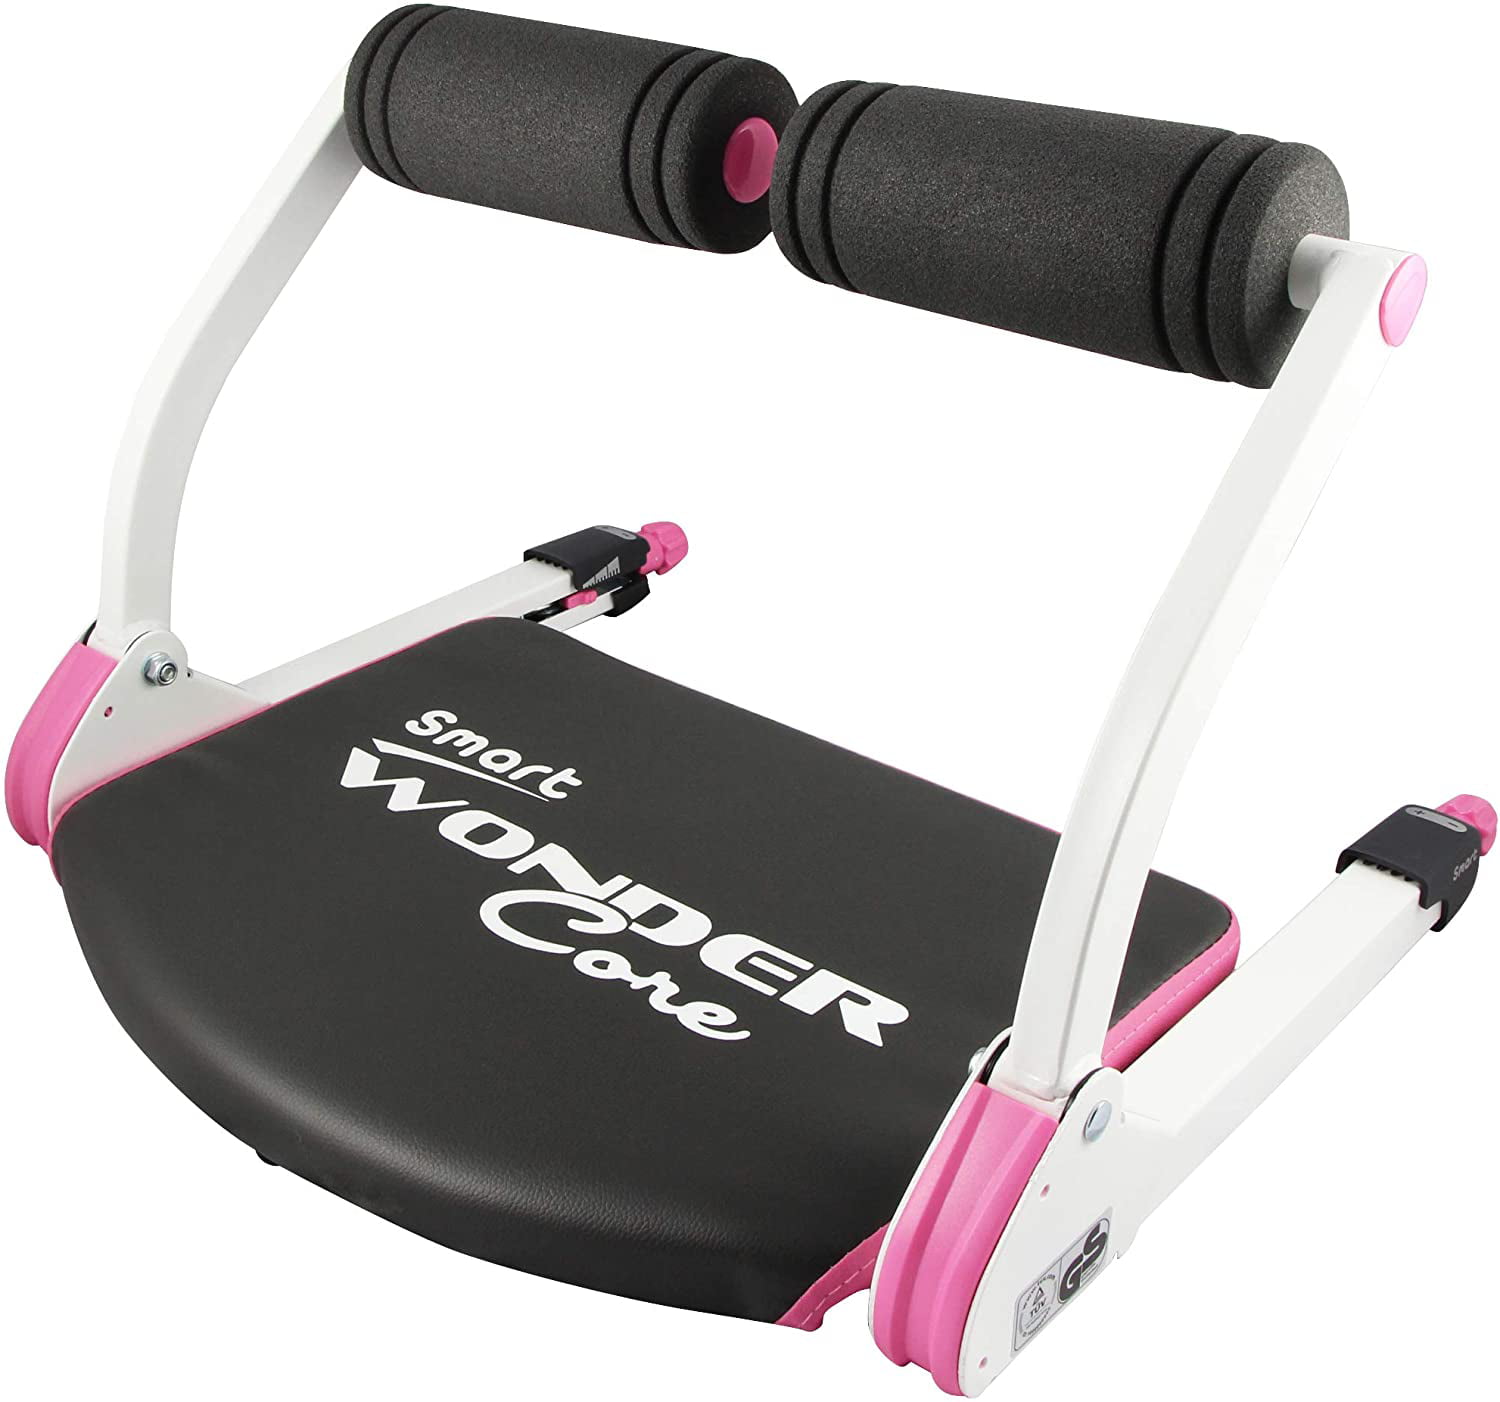 Merchandising Impressionisme wrijving WONDER CORE Smart : Cardio+ Body Muscle Toning - Fitness Equipment -  Muscles Building Exercises- Compact & Portable with Original Training App &  Fitness Guide - Walmart.com